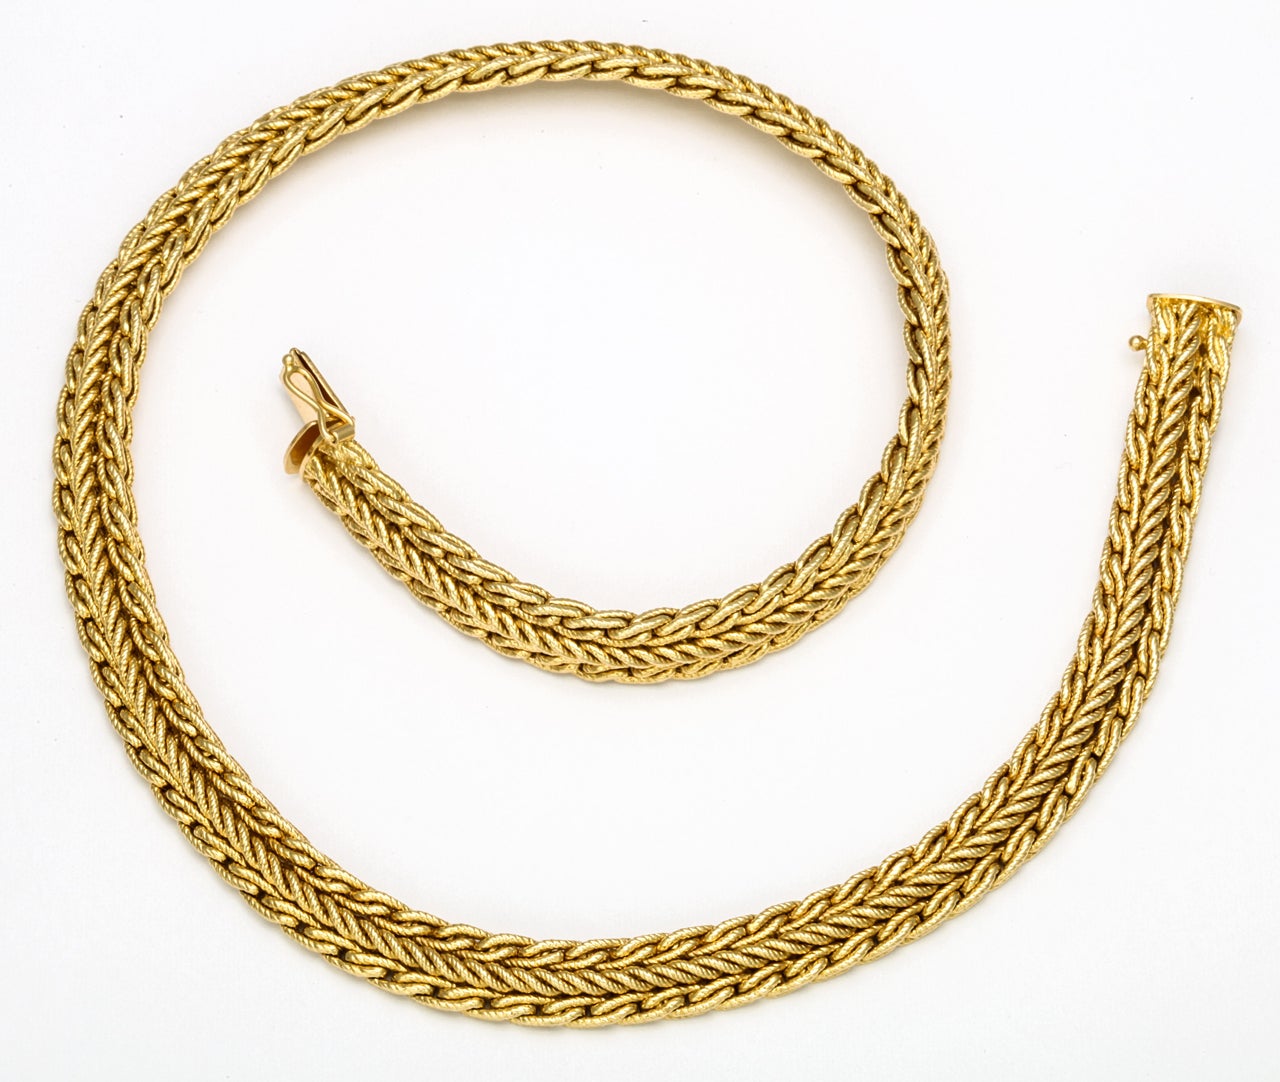 18kt yellow gold herringbone design necklace made by TIFFANY AND COMPANY